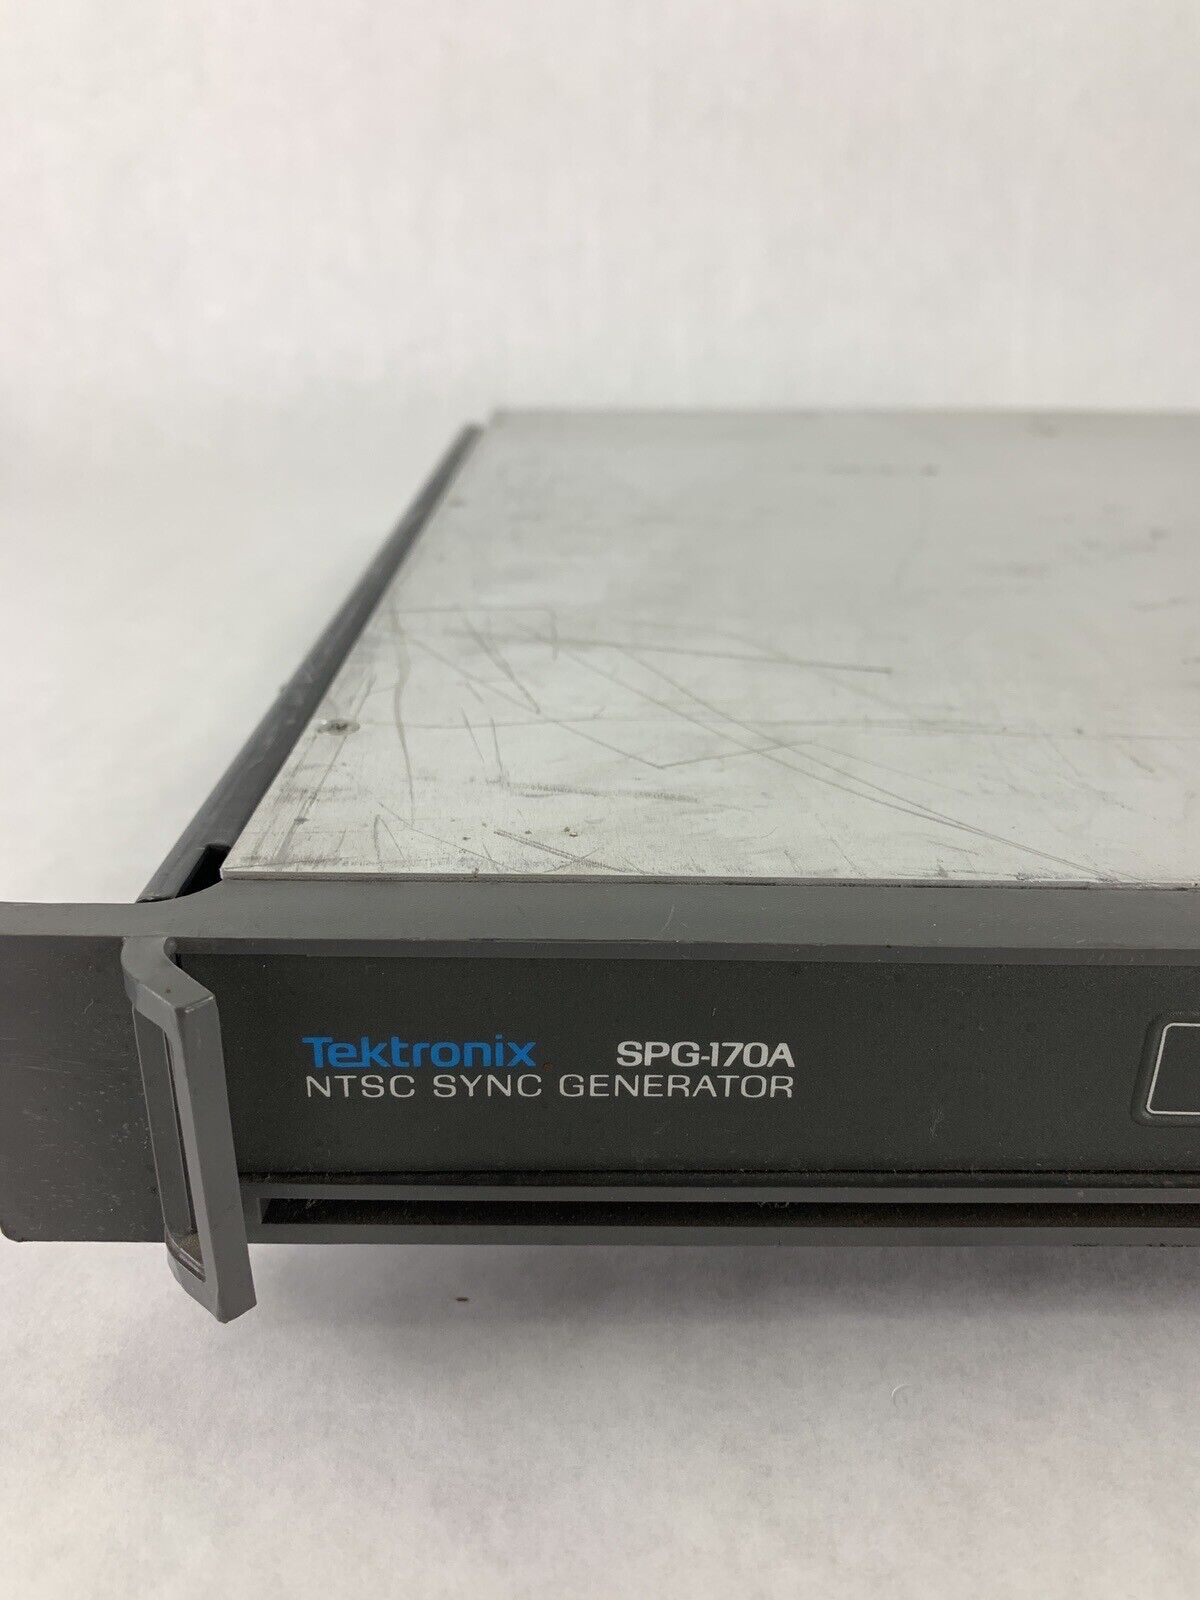 Tektronix SPG-170A NTSC Sync Generator For Parts and Repair